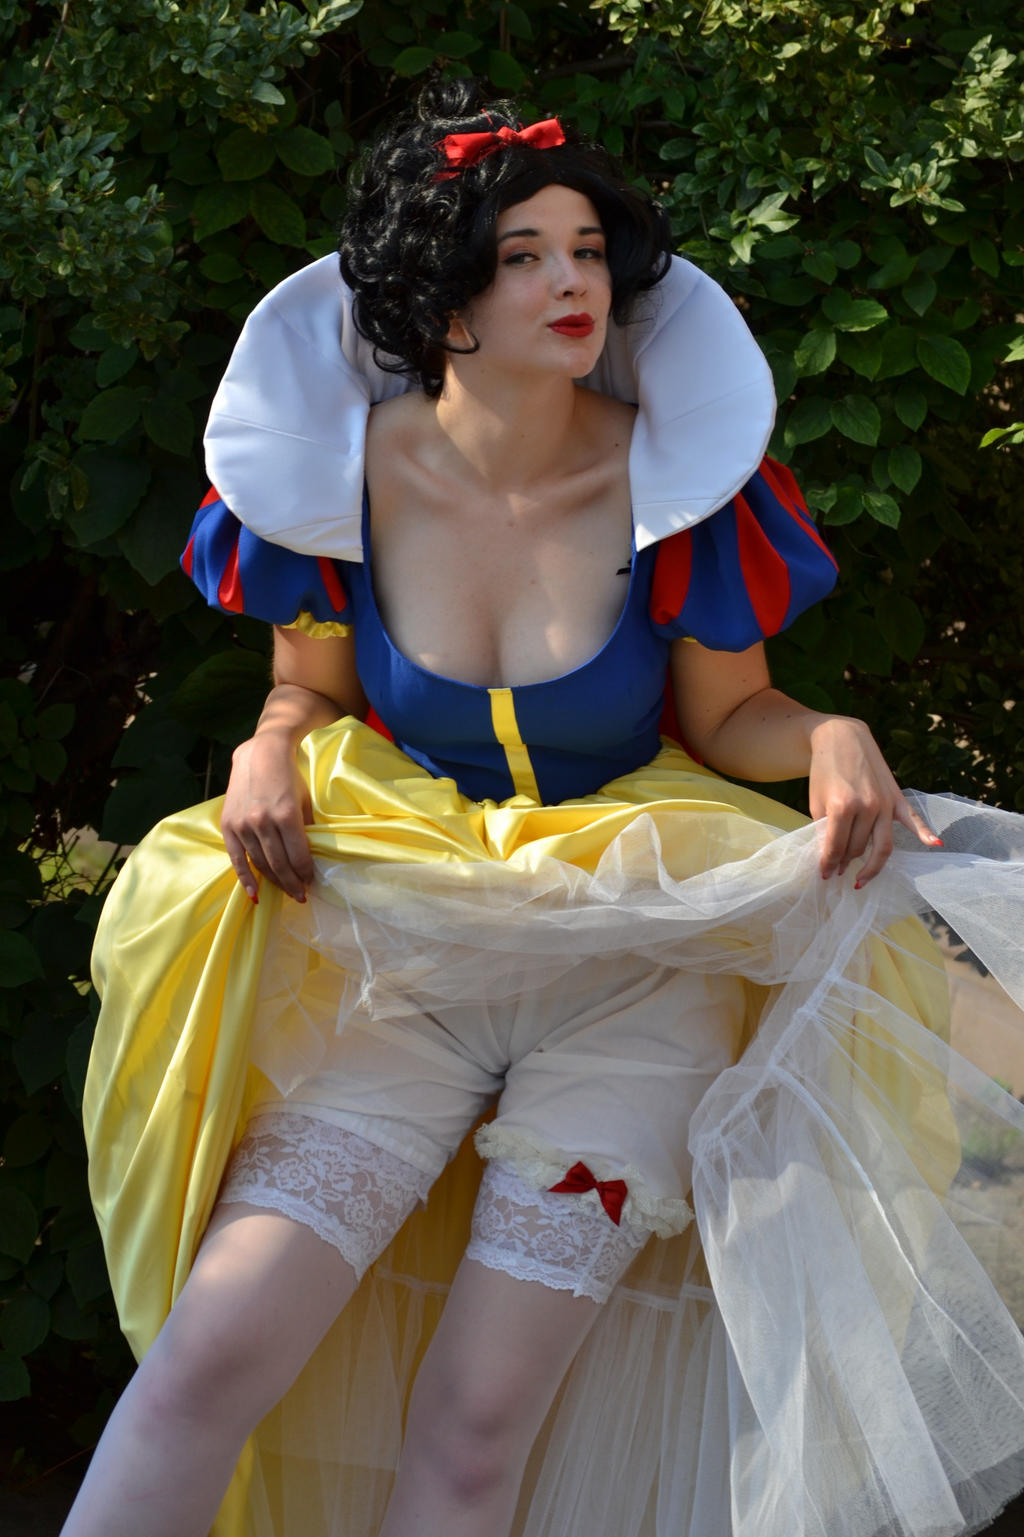 What's under the Snow white's dress